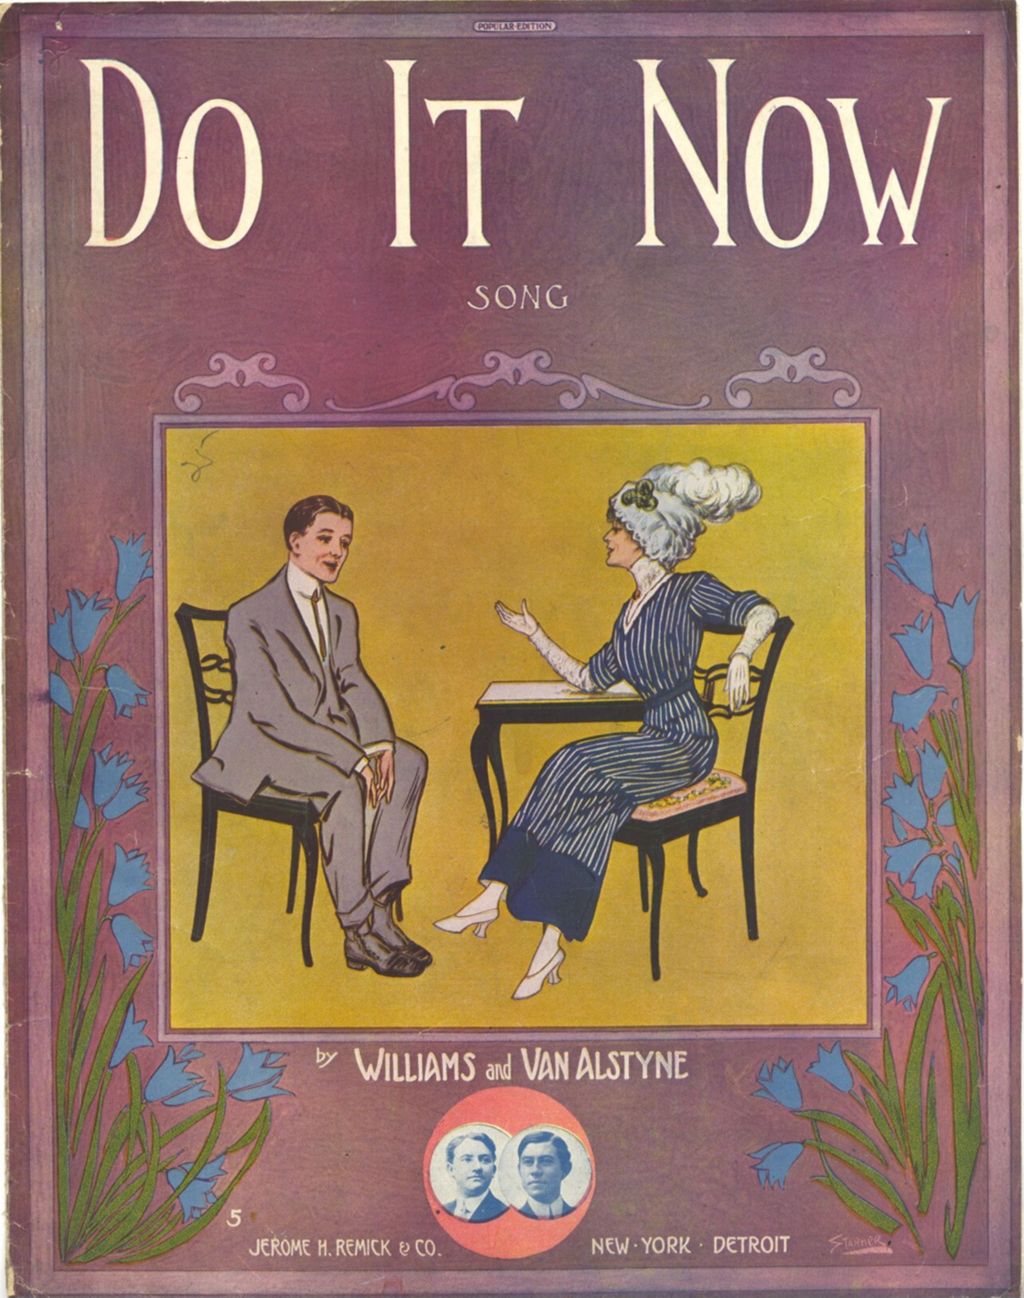 Miniature of Do It Now